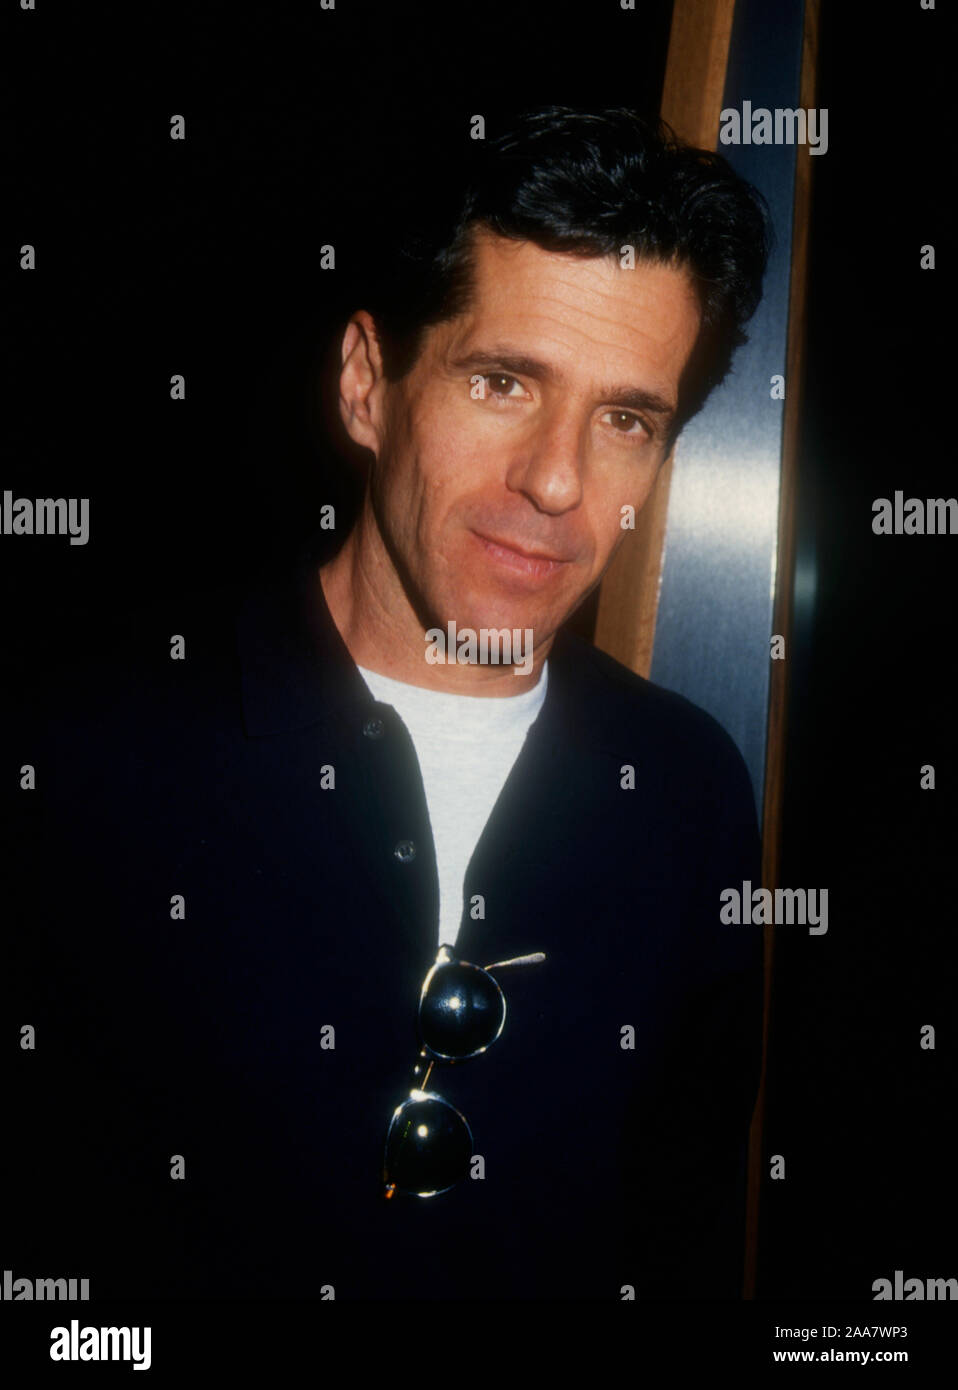 Las Vegas, Nevada, USA 10th March 1995 Peter Morton attends the Grand Opening Celebration of the Hard Rock Hotel hosted by Peter Morgan on March 10, 1995 at The Hard Rock Hotel Las Vegas in Las Vegas, Nevada, USA. Photo by Barry King/Alamy Stock Photo Stock Photo